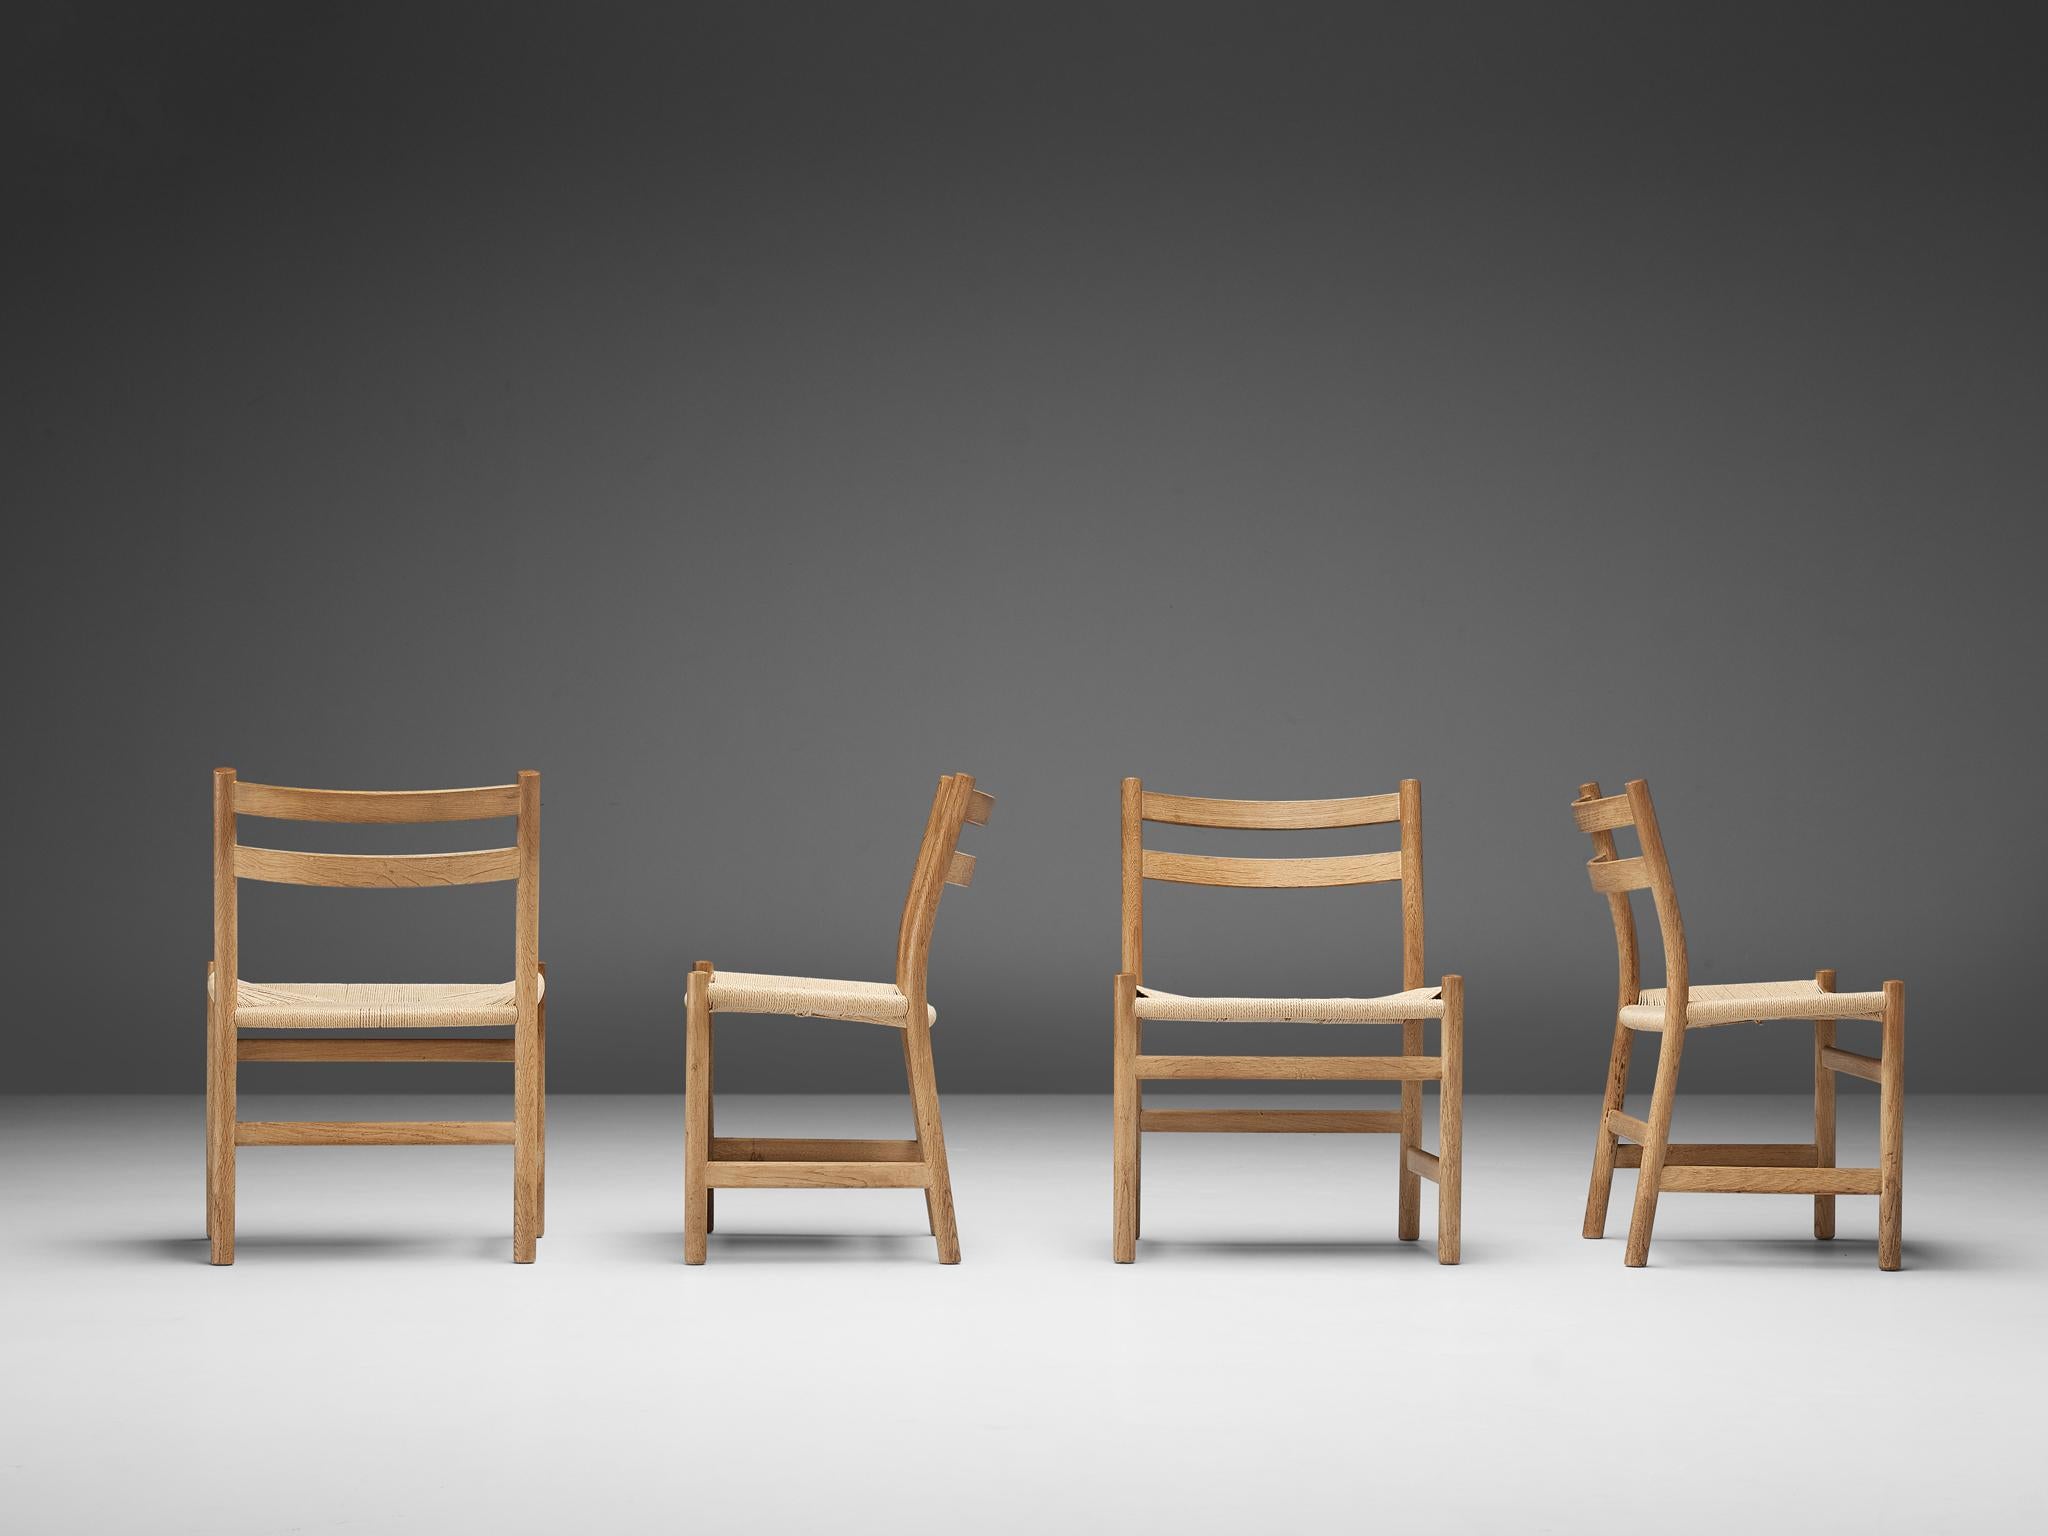 Kurt Østervig for KP Møbler, set of four chairs model KP22, oak, paper cord, Denmark, 1960s

This set of four dining chairs is designed by Kurt Østervig and produced by KP Møbler in the 1960s. This dining set is well executed and quintessentially